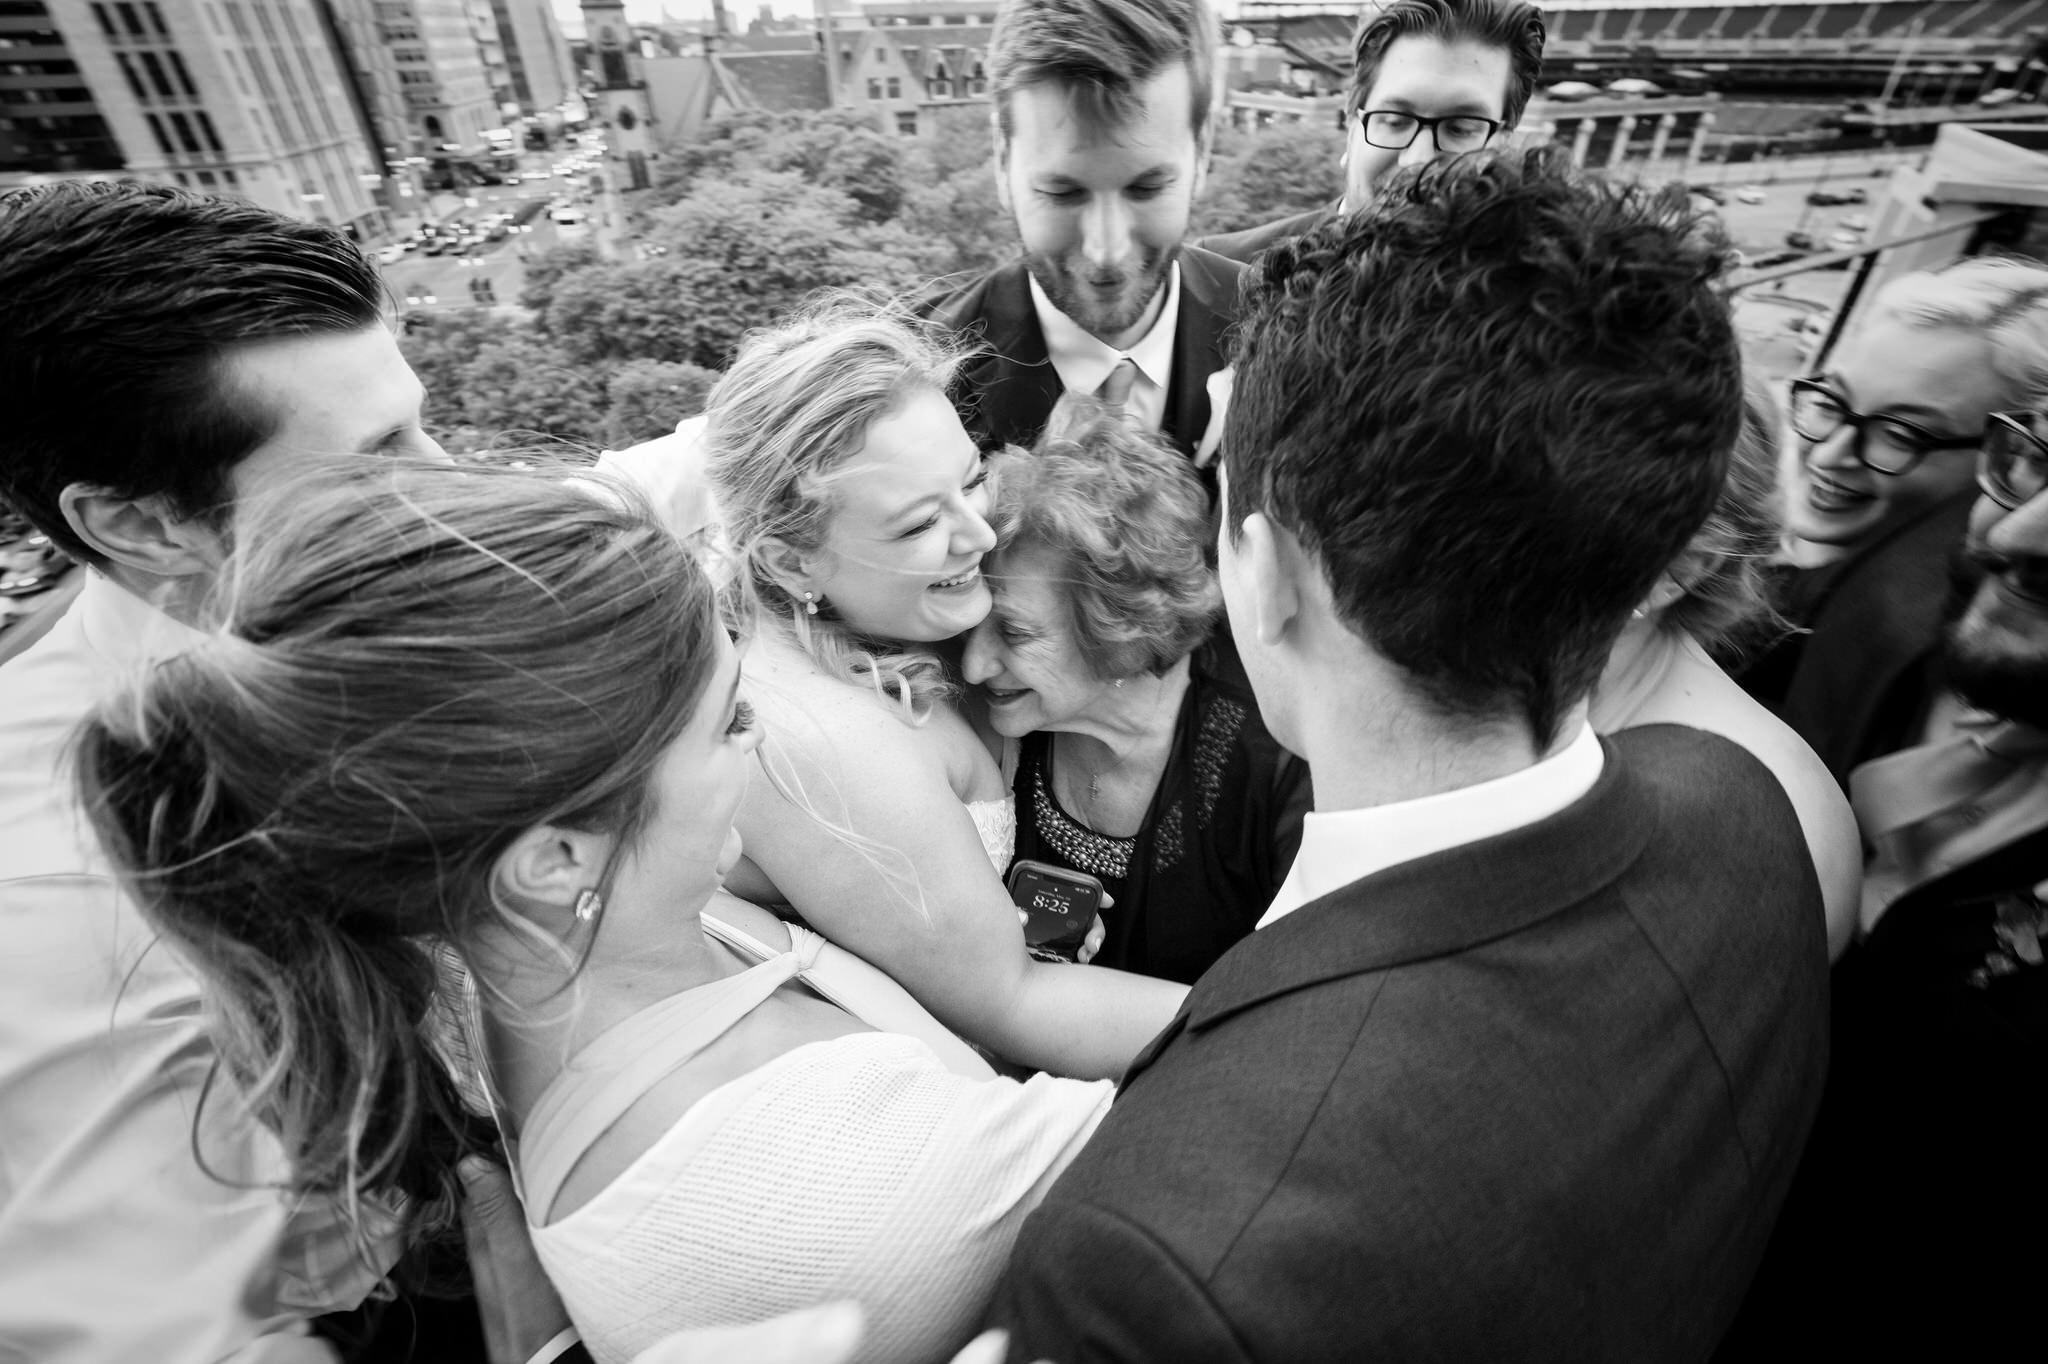 Family surrounds grandma in a candid moment at a Madison Building wedding in Detroit.  